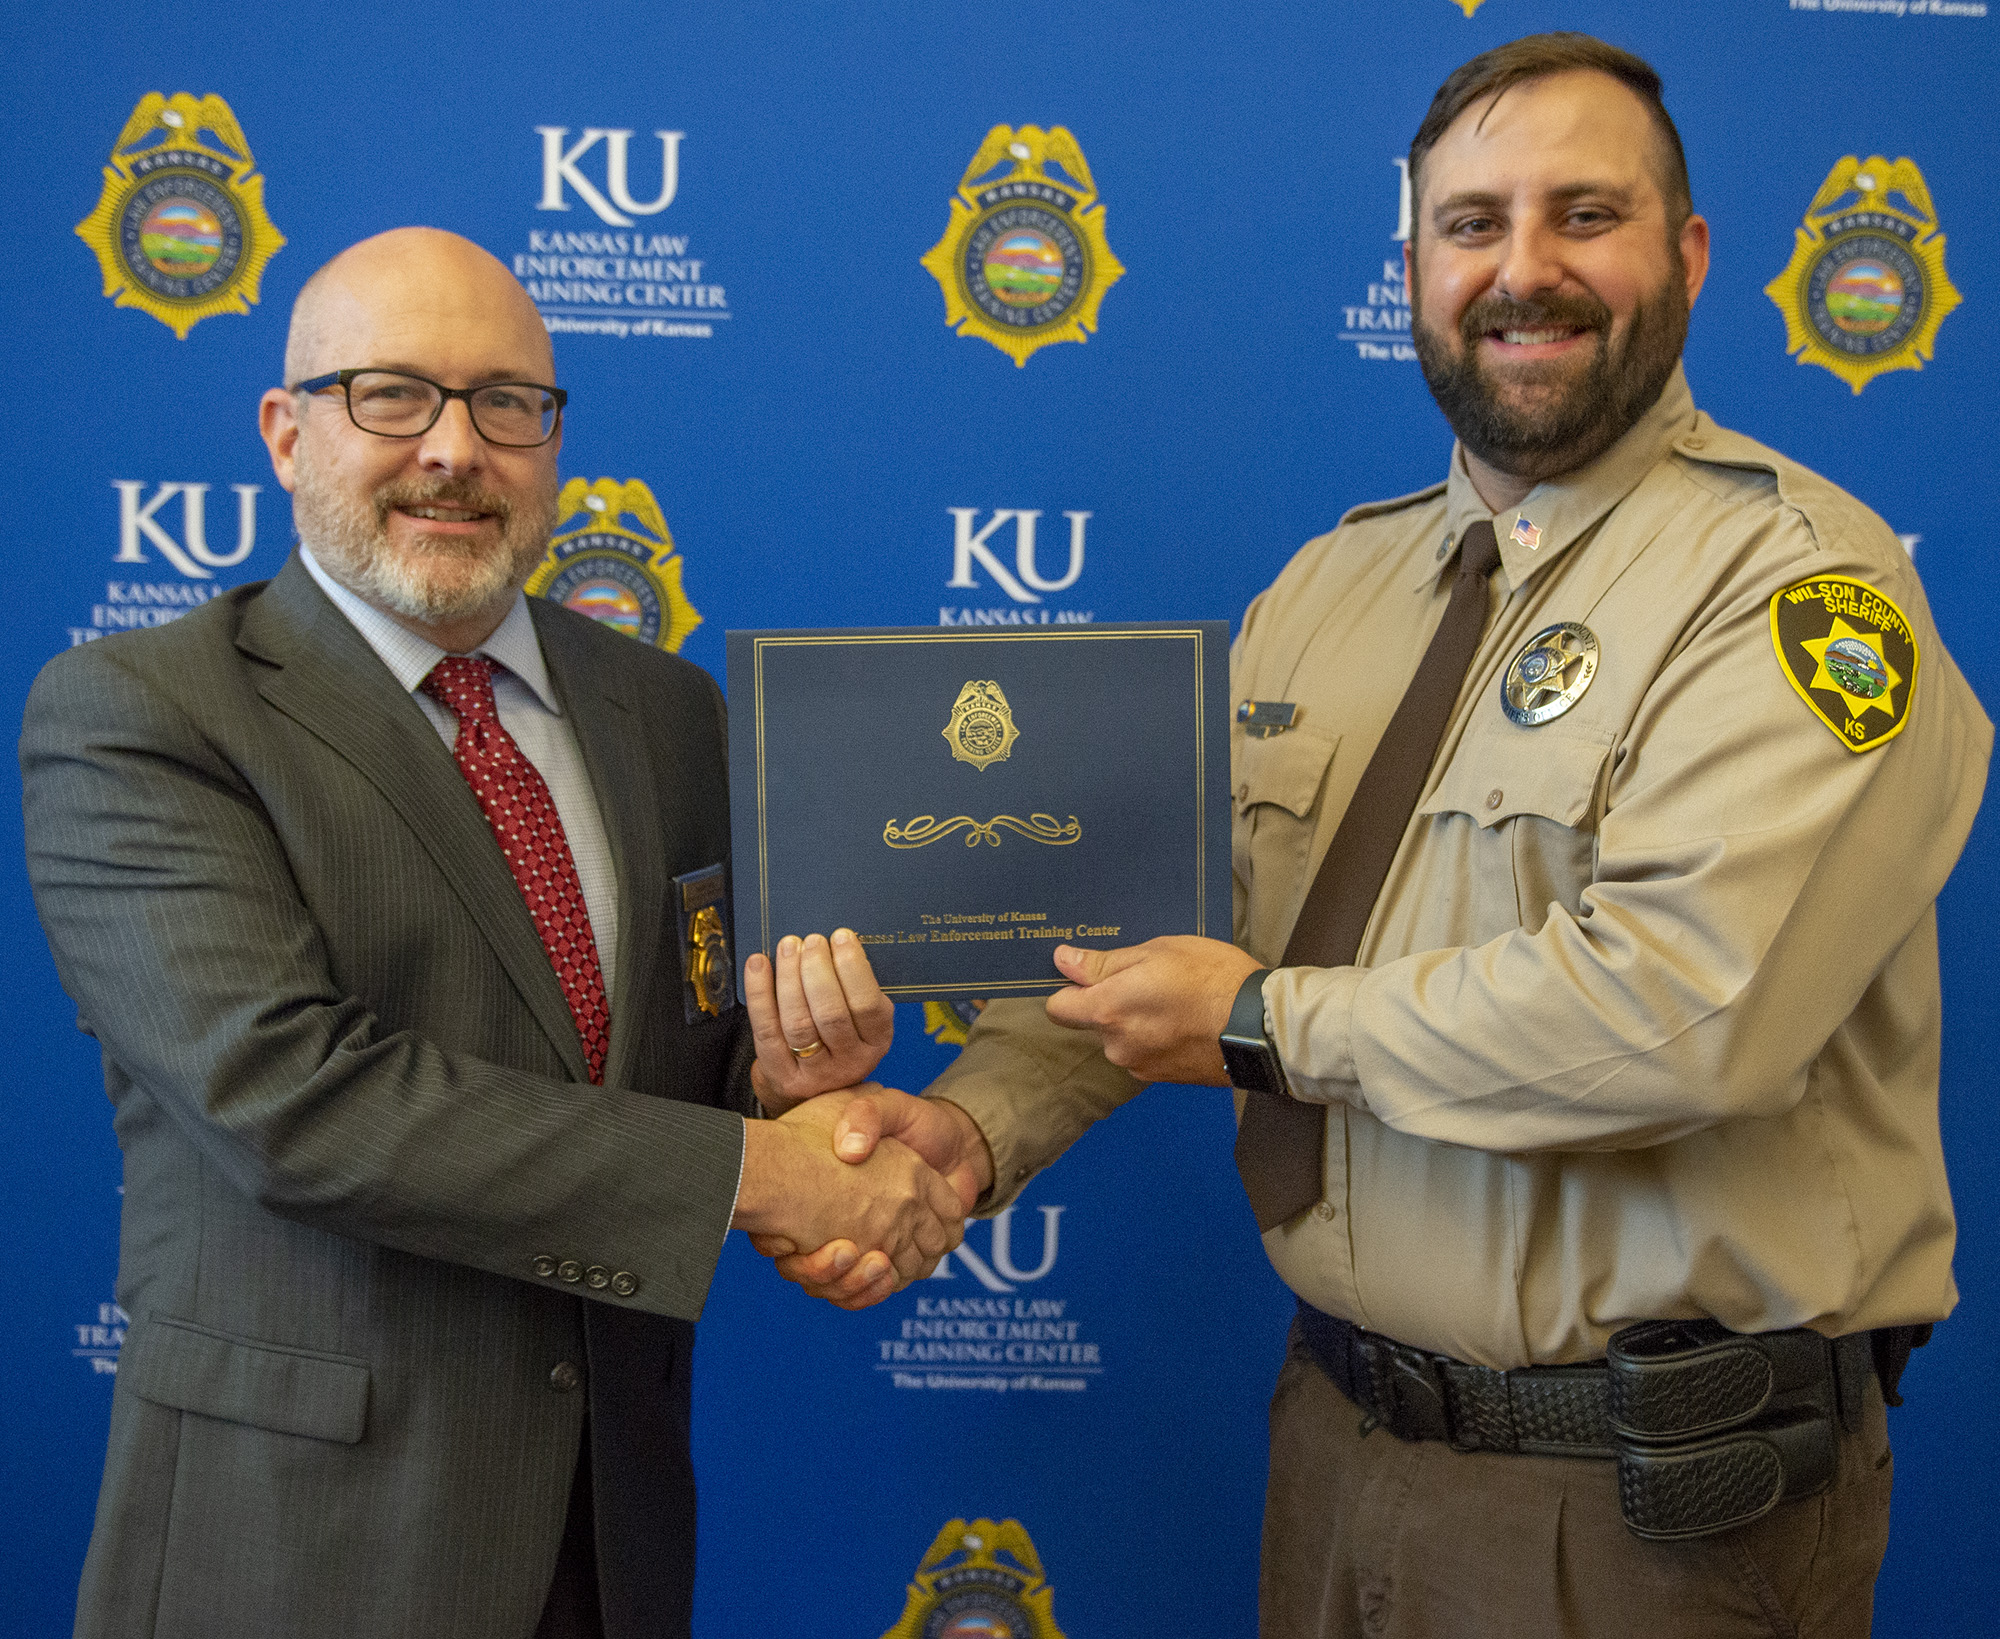 "KLETC Executive Director Darin Beck stands with the class president of the 298th, Deputy David Decker"